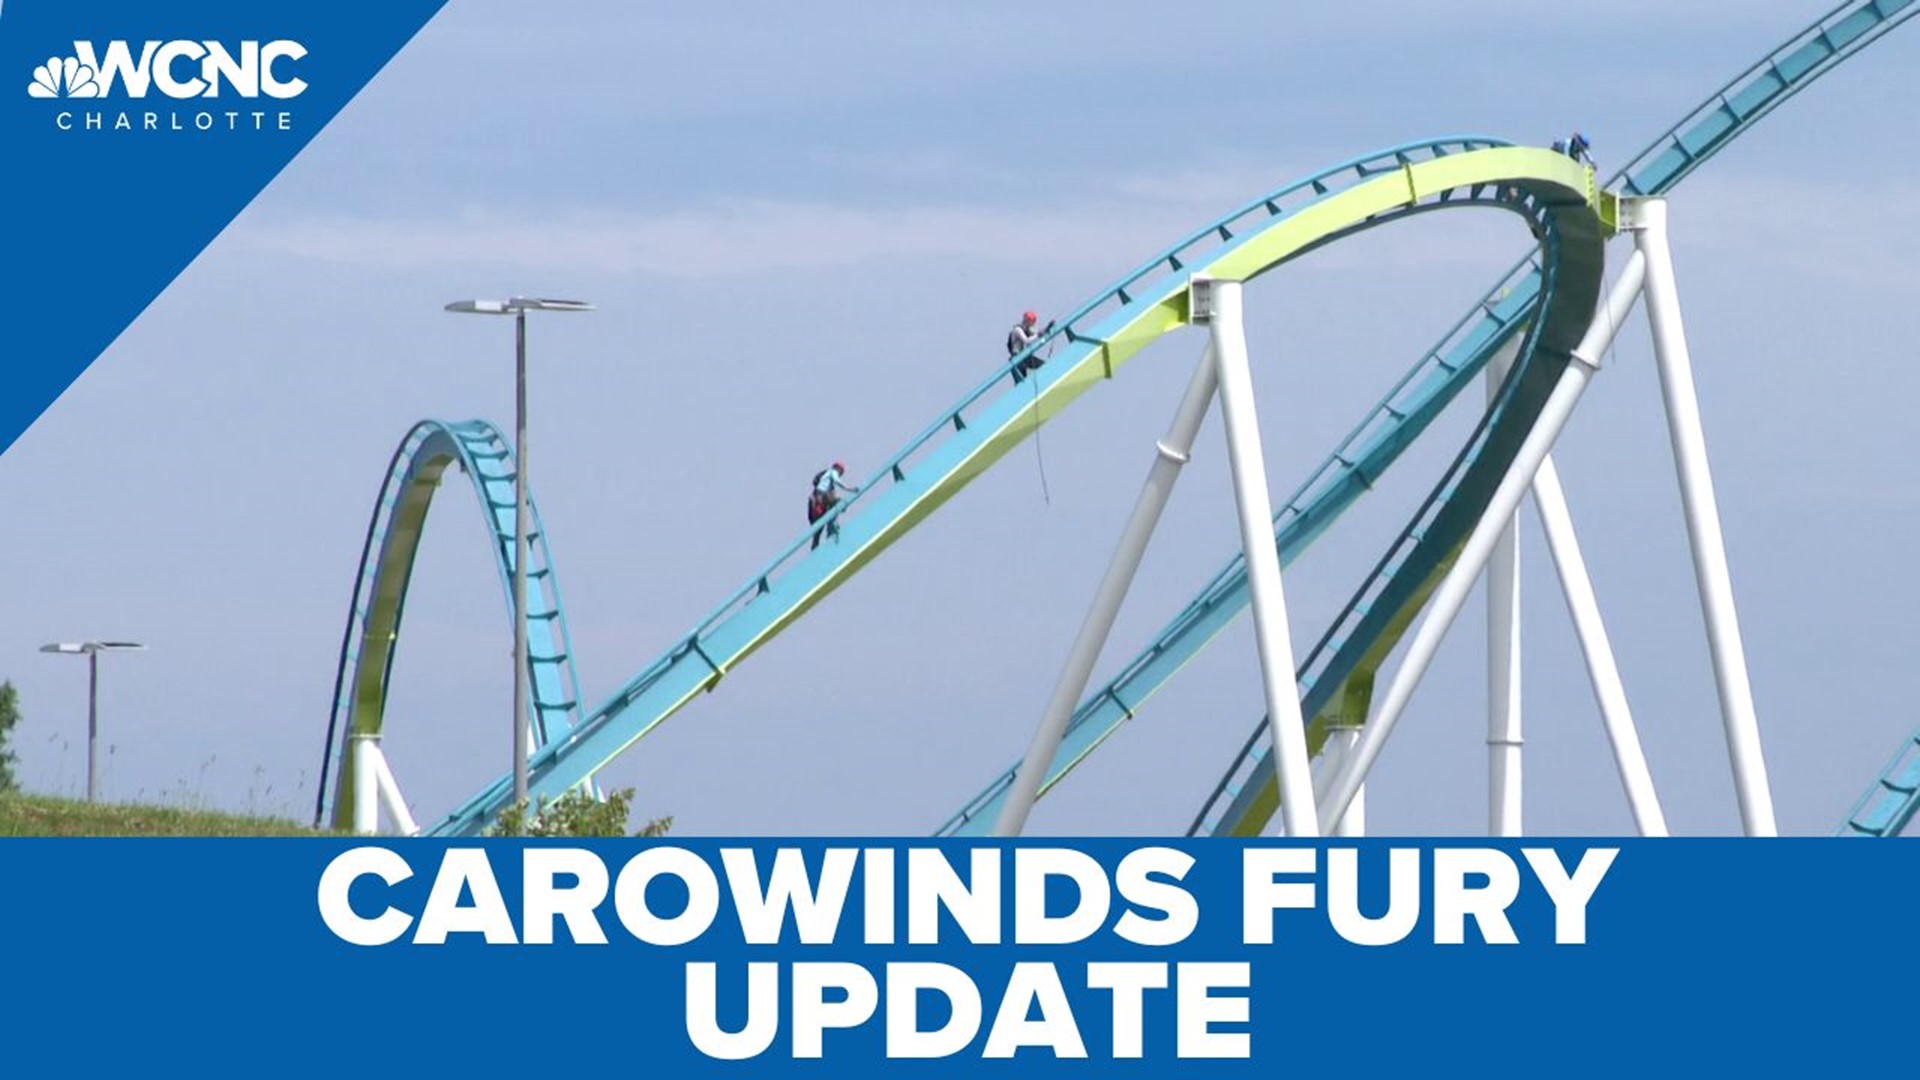 The crack in the "Fury 325" was discovered by a visitor, who spotted it just after his family got off the ride.